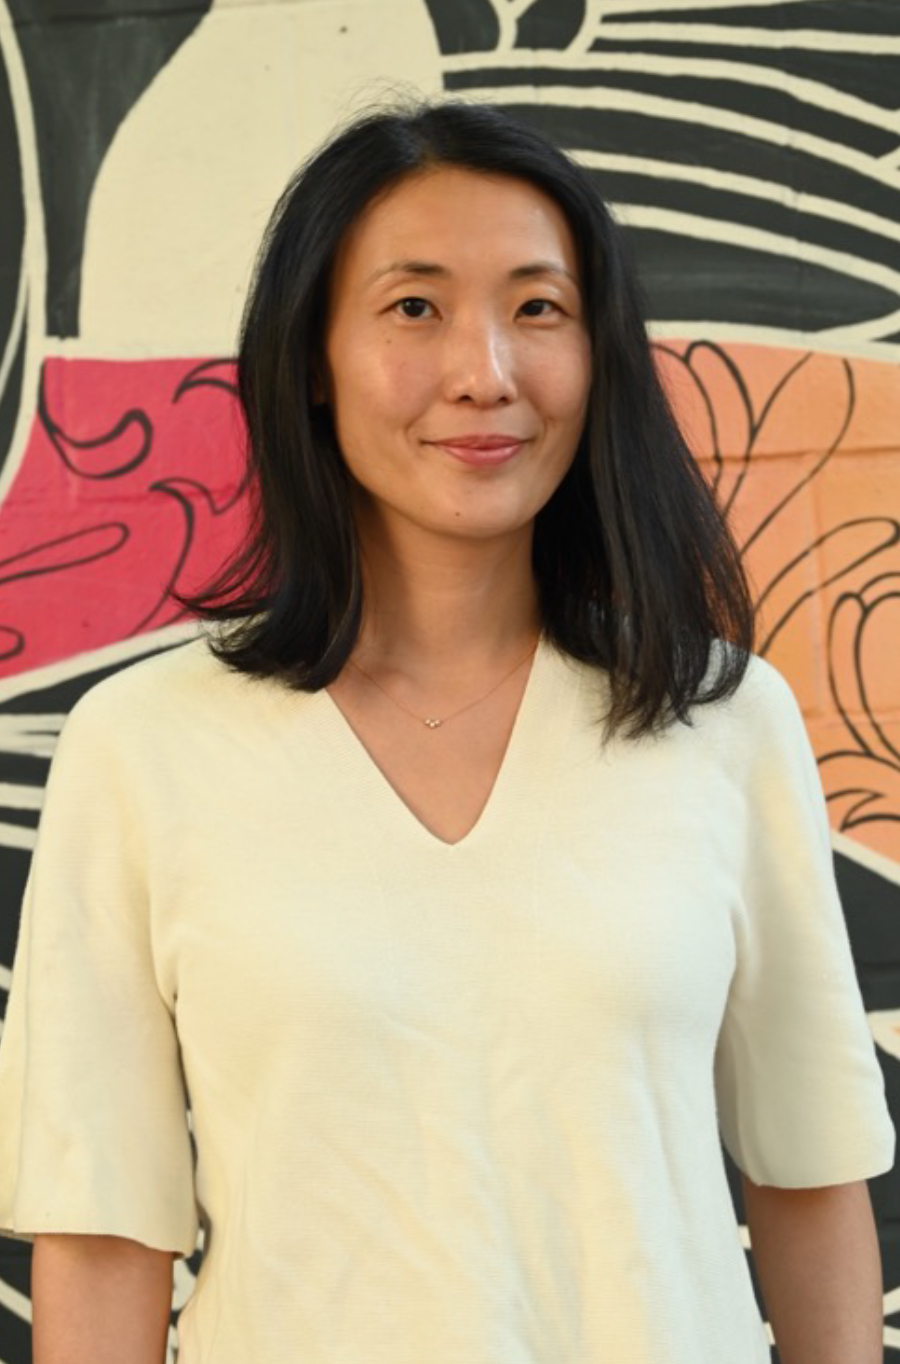 A photographic style image of Dr. Christine Ou standing against a wall with graffiti style artwork.